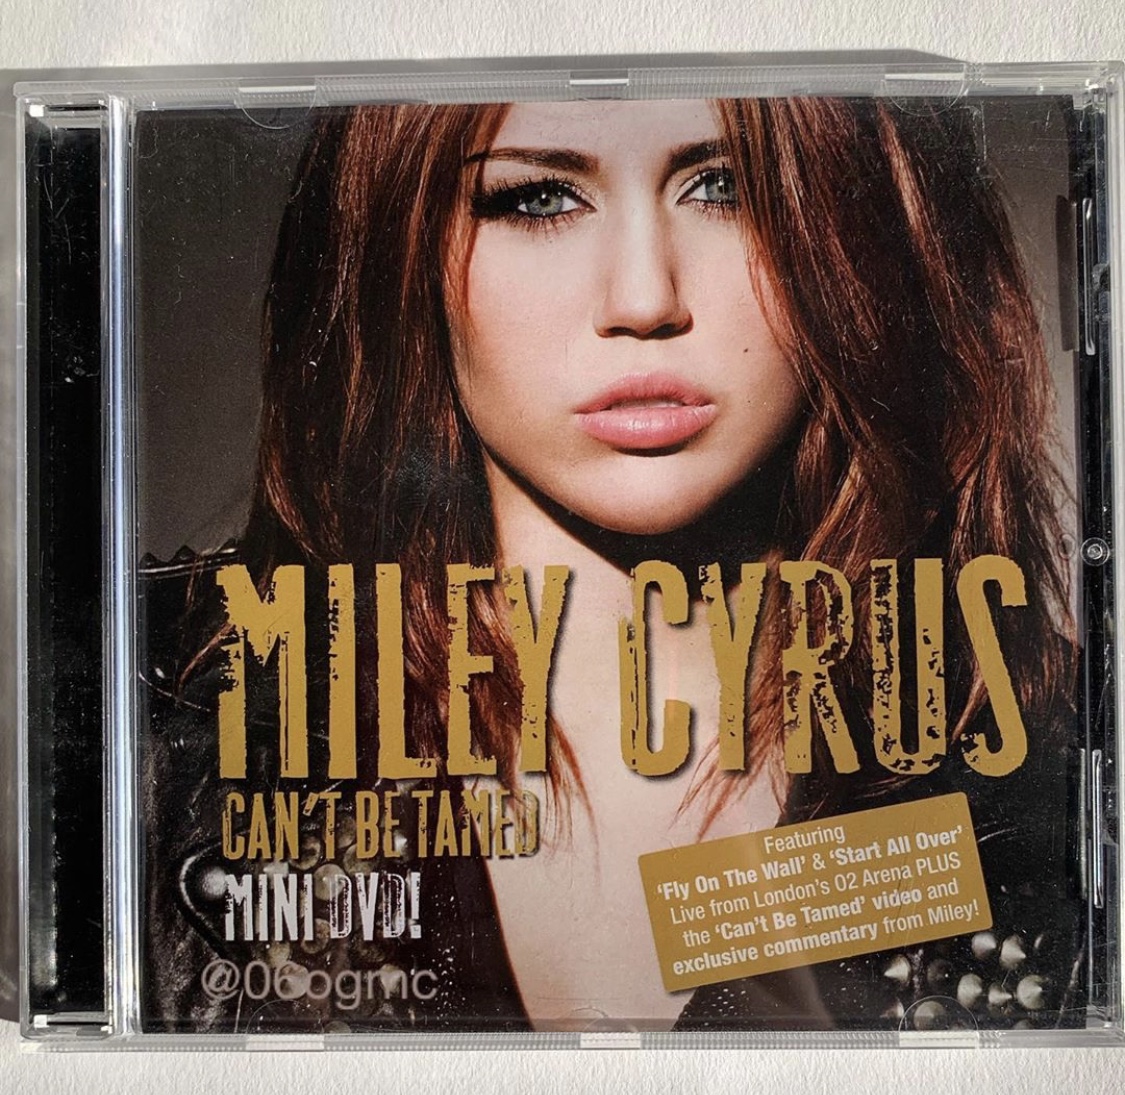 Thread by @MileyCyrusBz, 10 years ago today, @MileyCyrus's third studio  album Can't Be Tamed was [...]